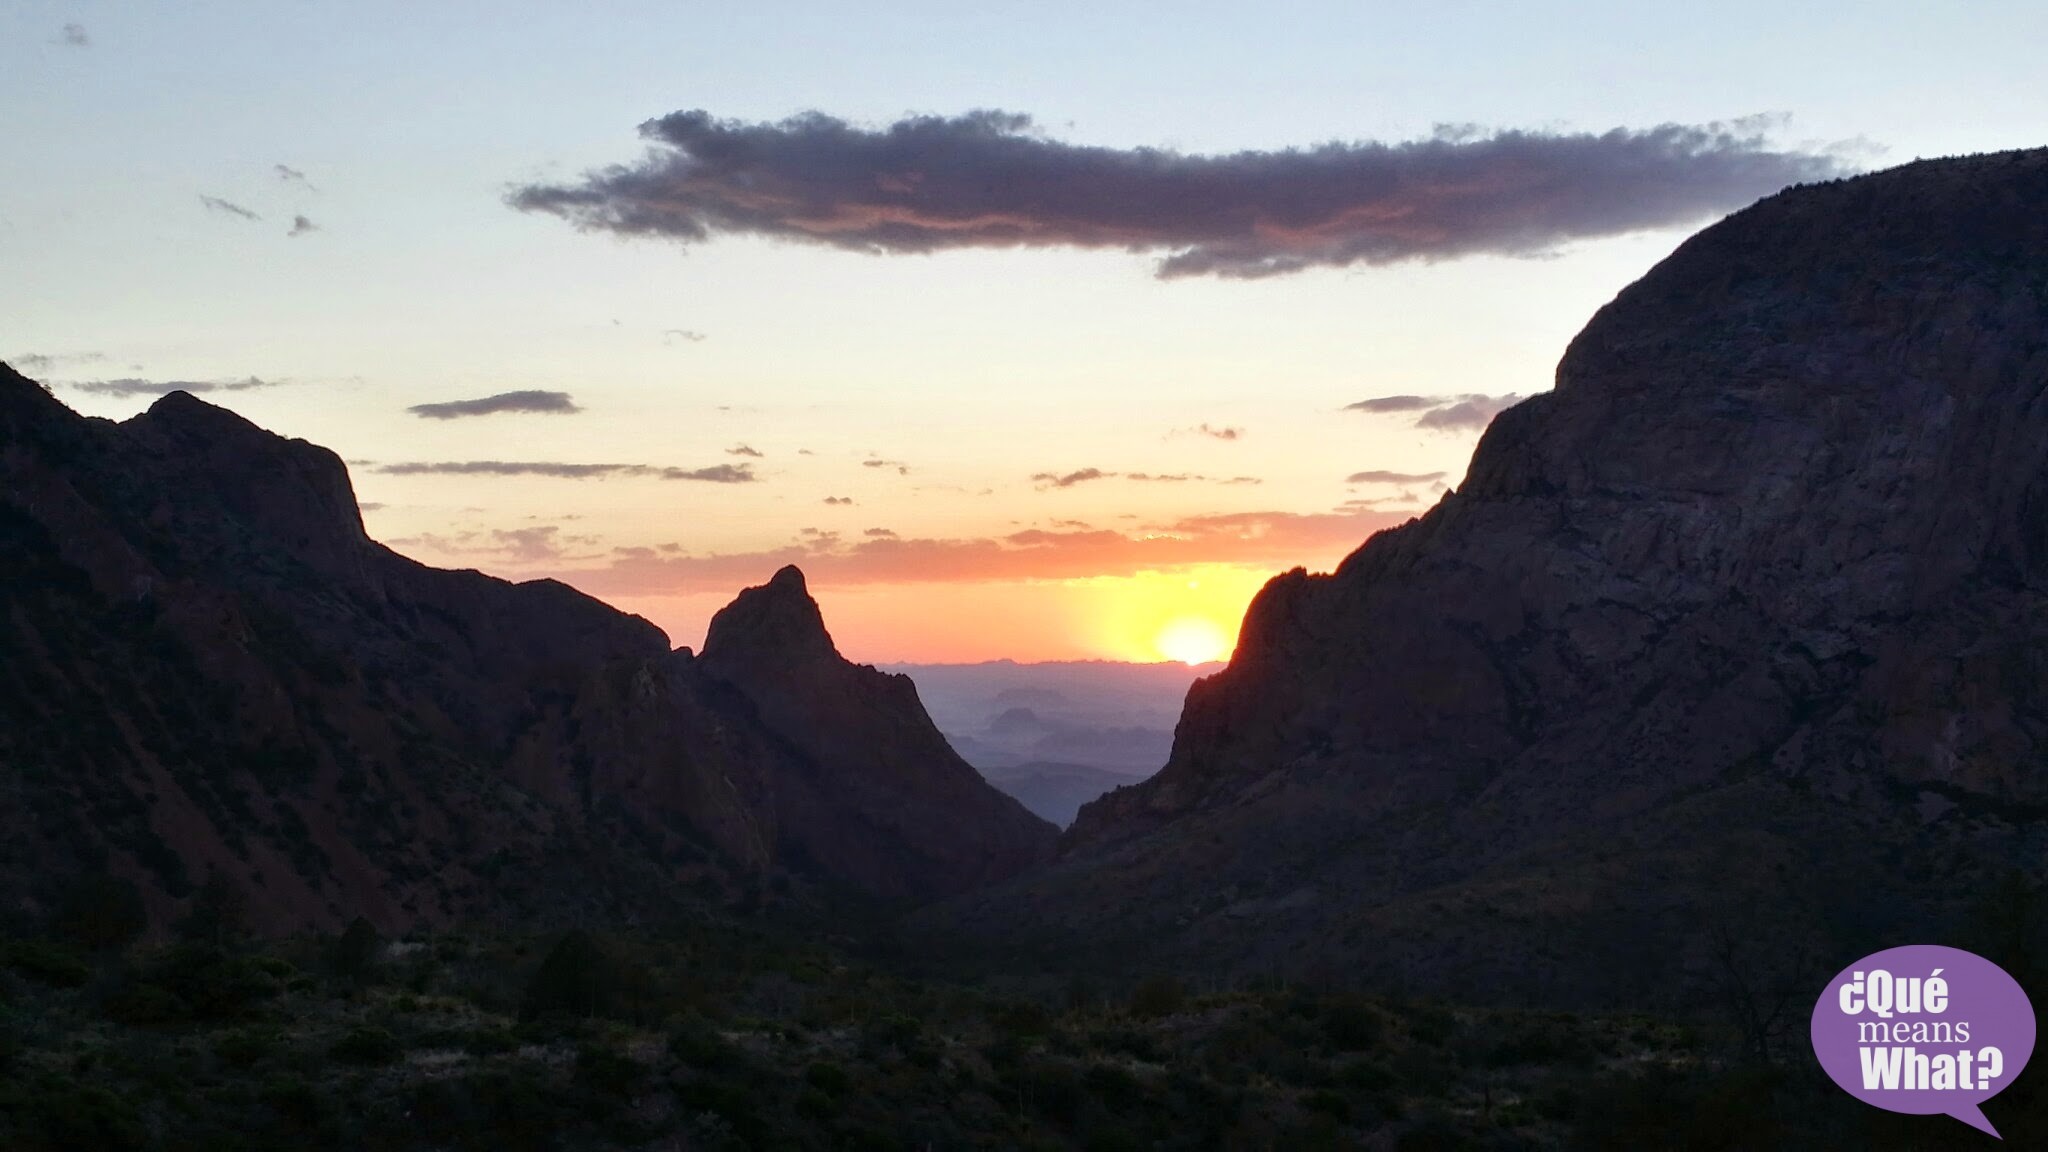 Sunset at the Window at Big Bend National Park